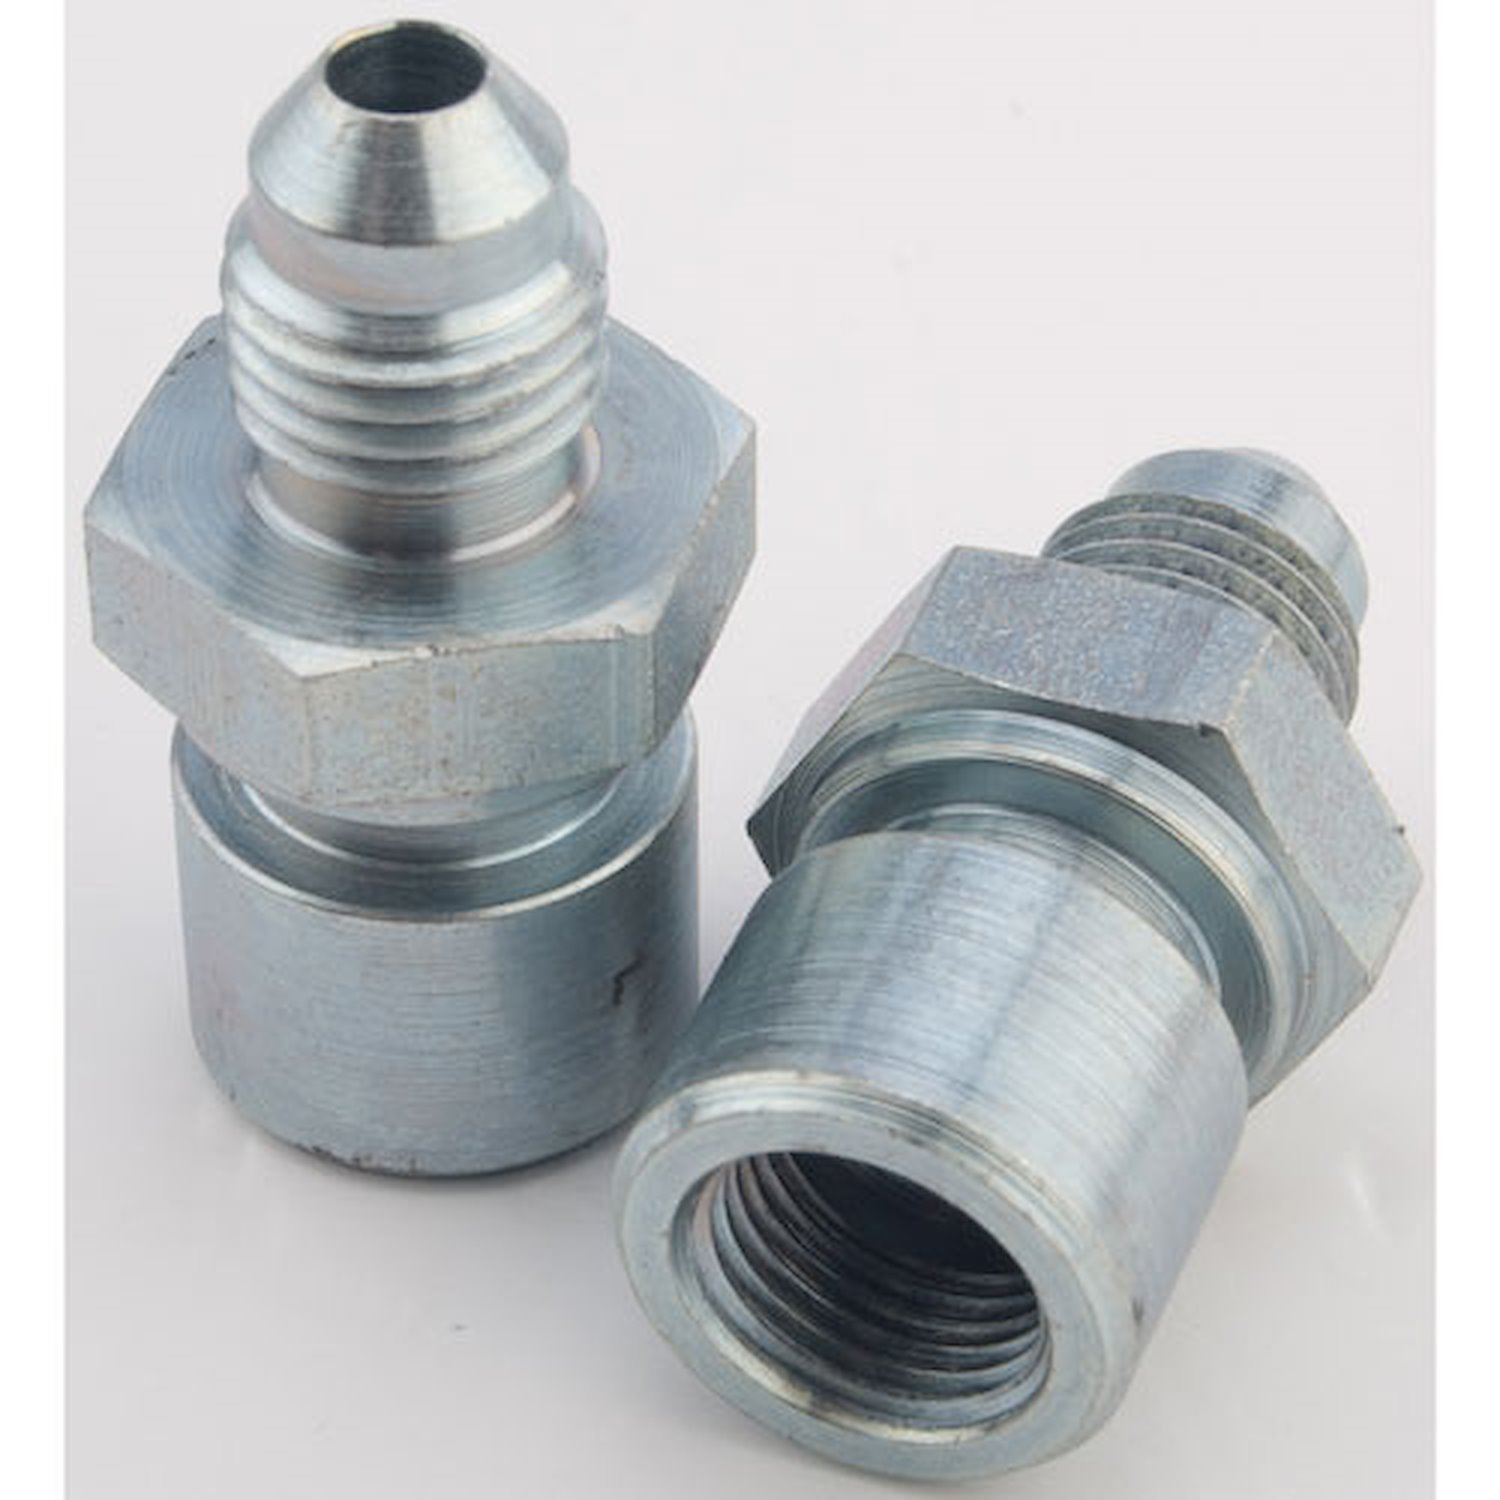 AN to Inverted Flare Female Tube Adapter Fittings [-4 AN x 7/16 in.-24 Inverted Flare]